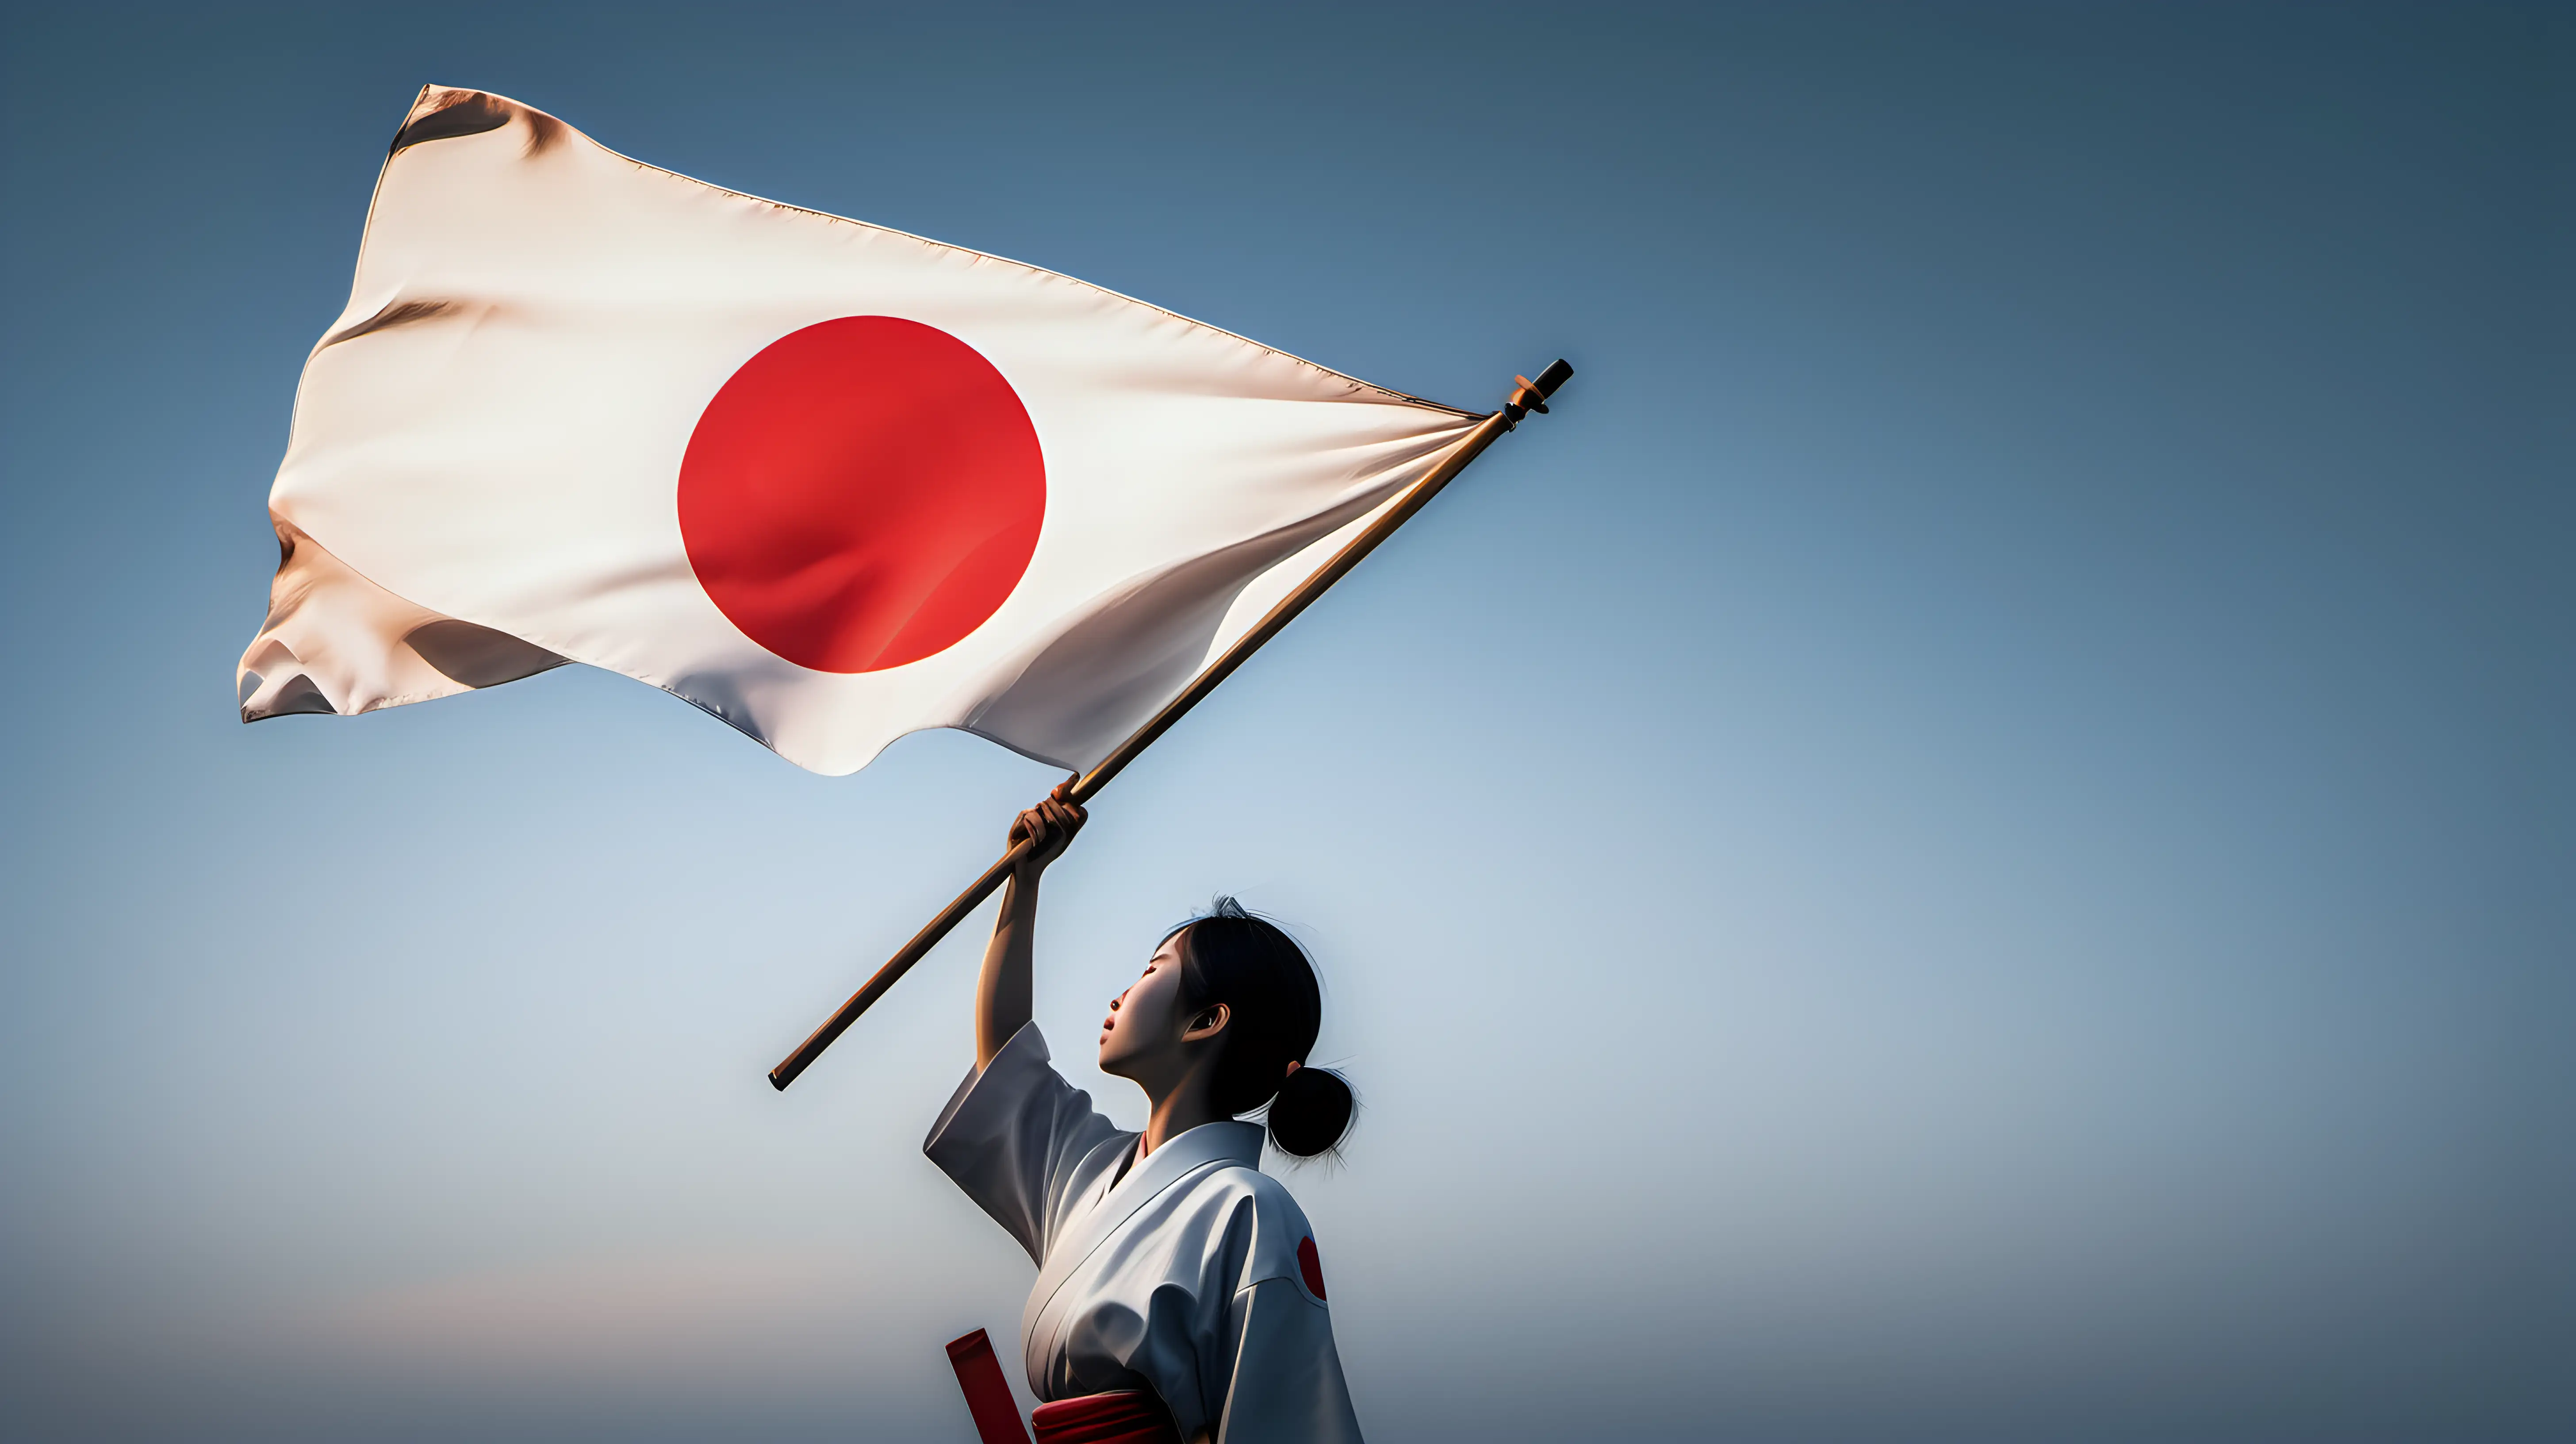 Illustrate the essence of national pride with an image of a person holding the Japanese flag high, symbolizing unwavering dedication to their country.